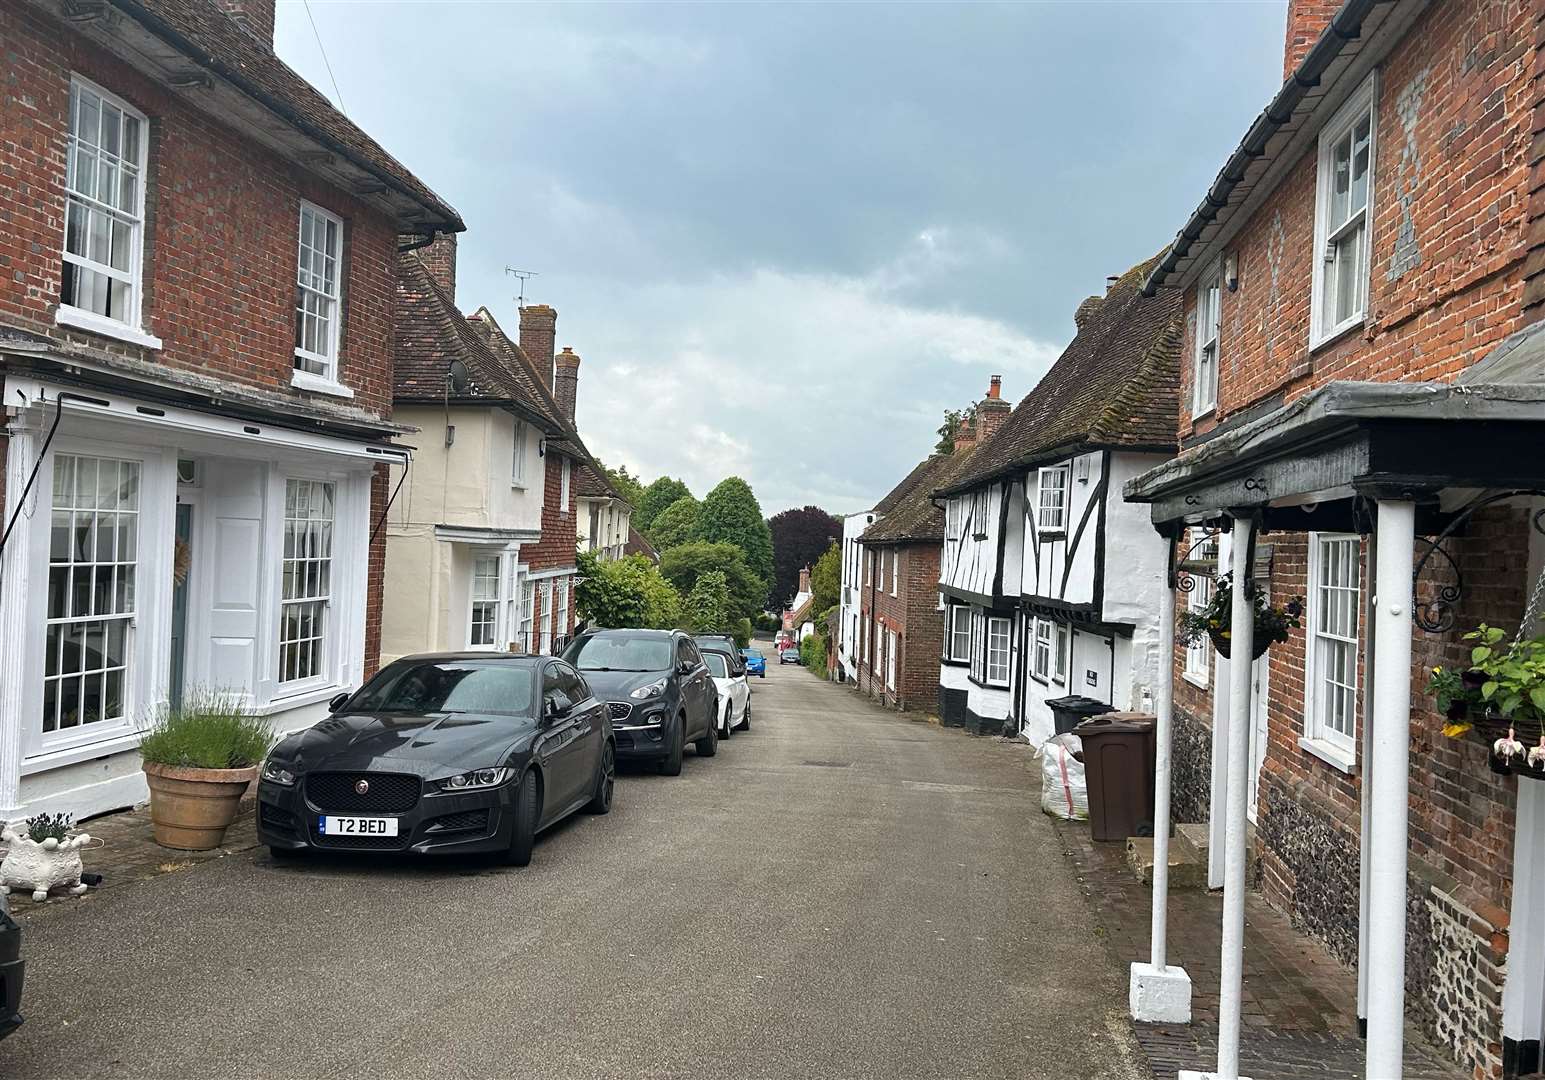 Chilham was named one of the prettiest UK villages last year by The Times